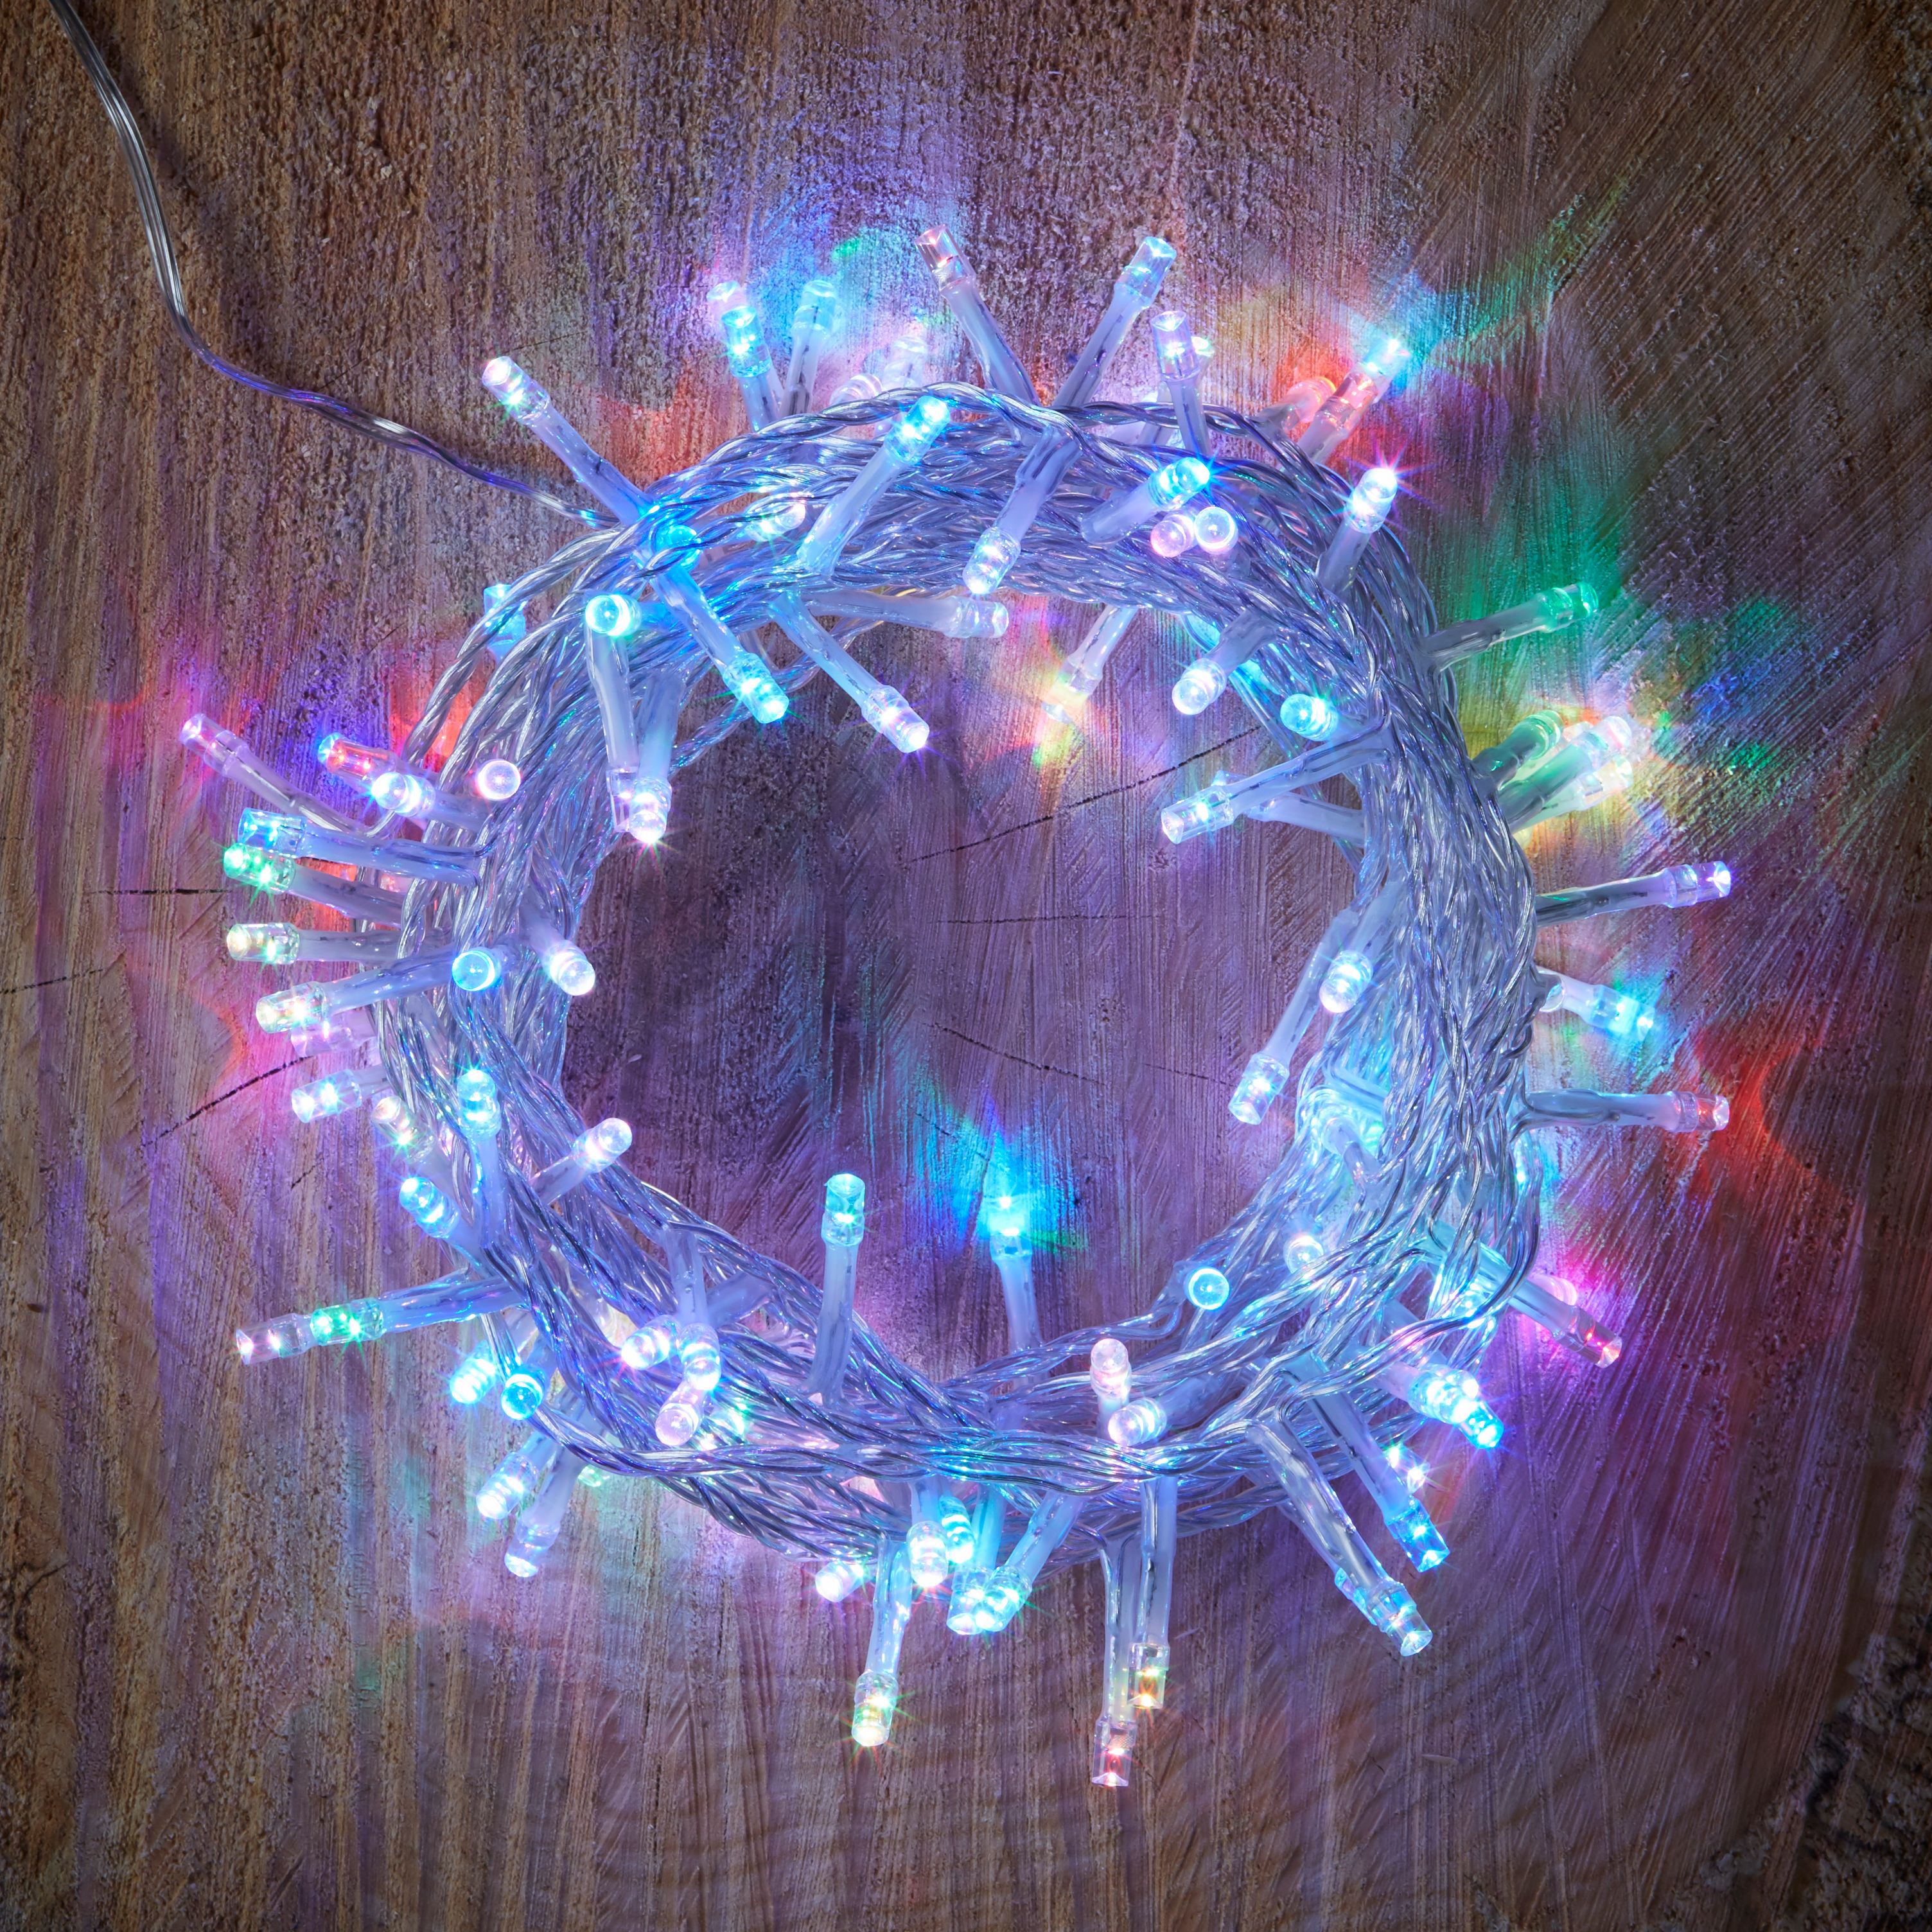 120 Colour Changing LED String Lights | Departments | DIY at B&Q